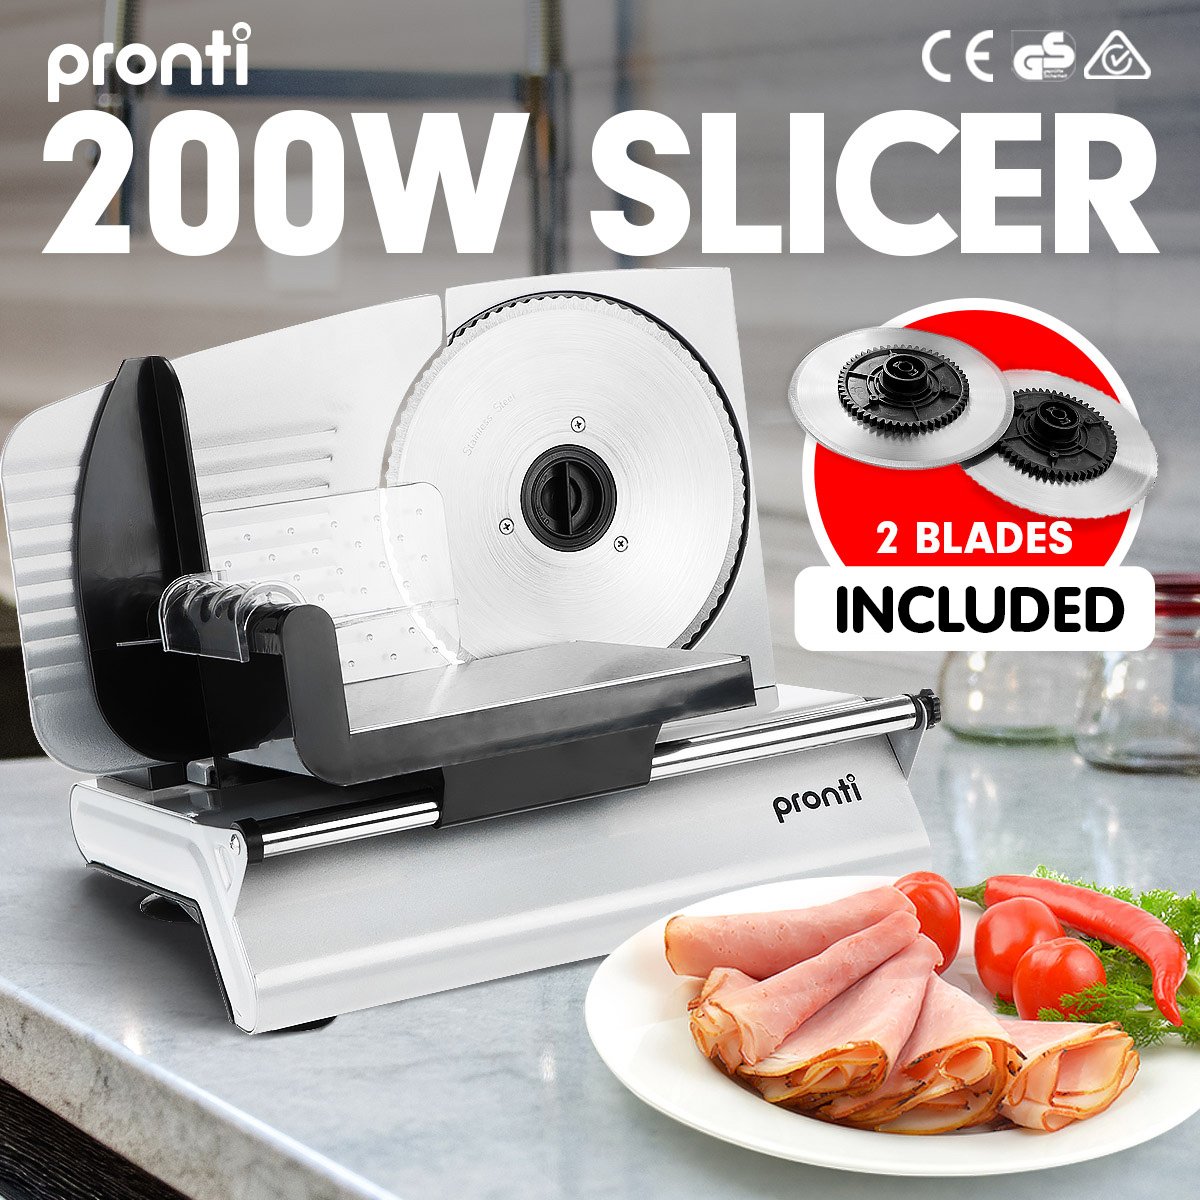 Pronti Deli and Food Electric Meat Slicer 200W Blades Processor - SILBERSHELL